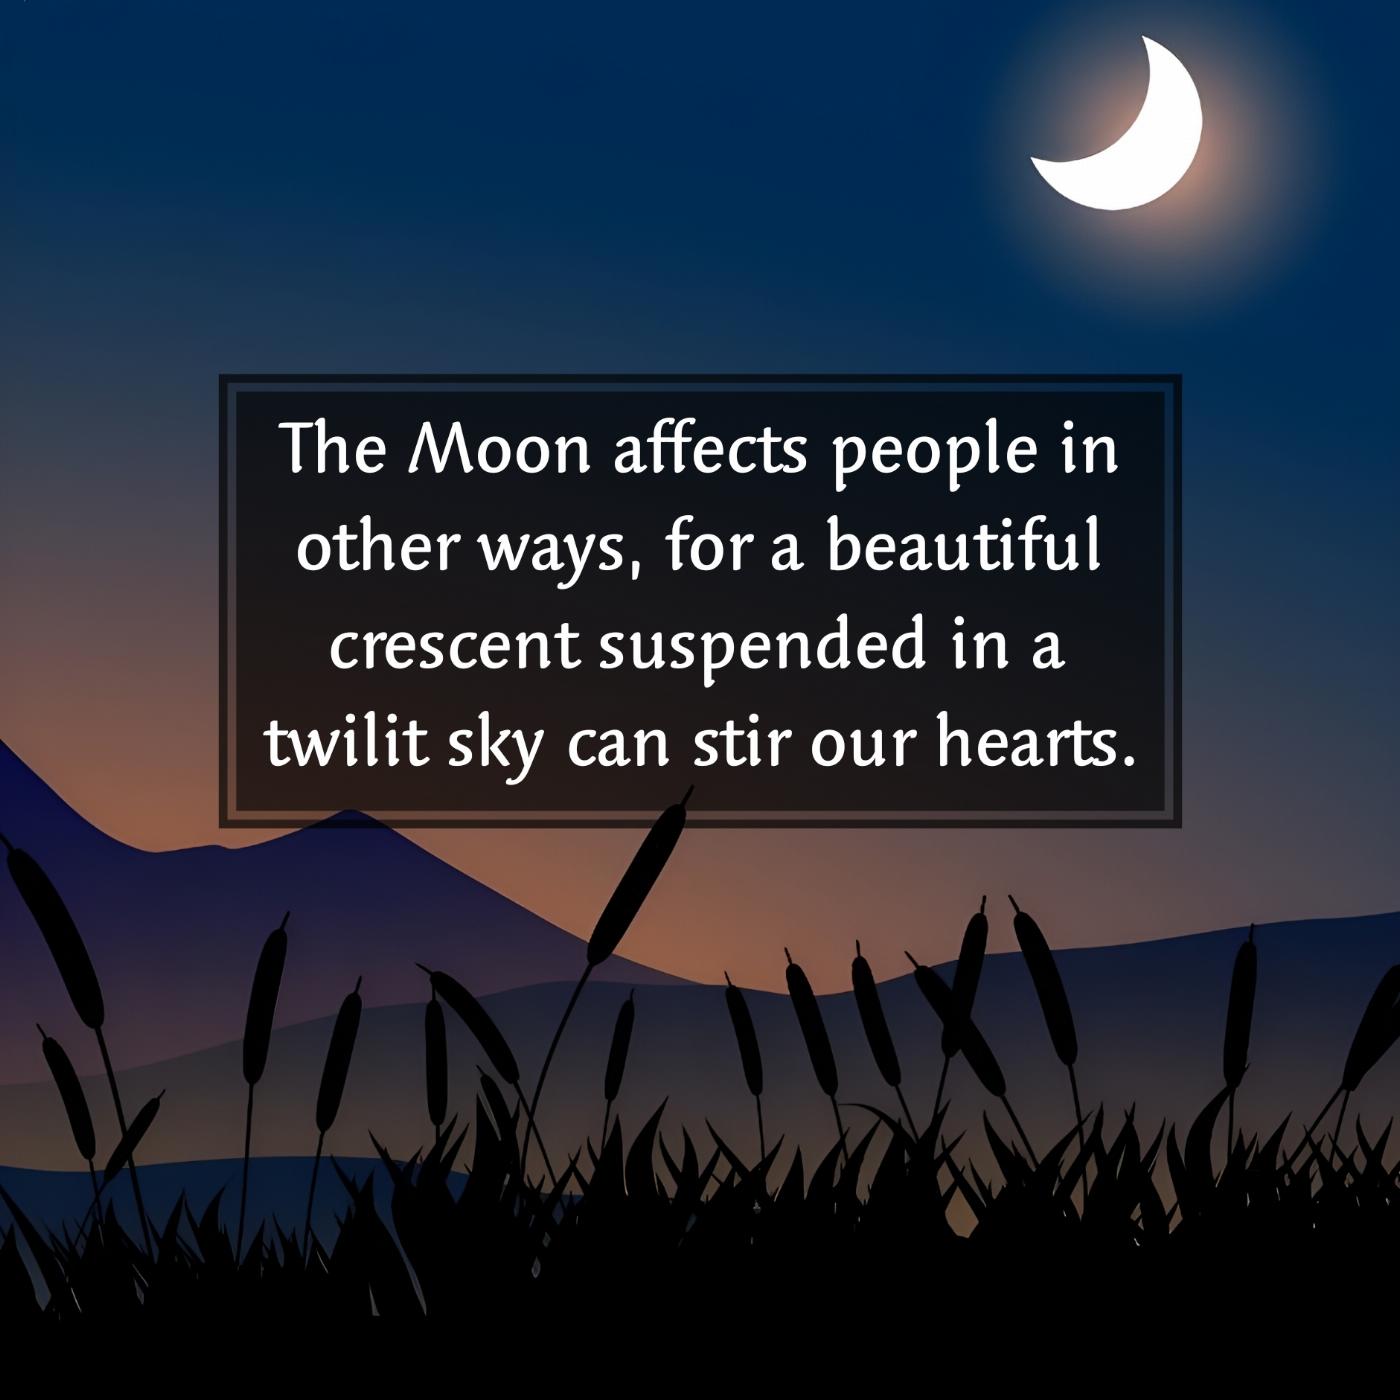 The Moon affects people in other ways